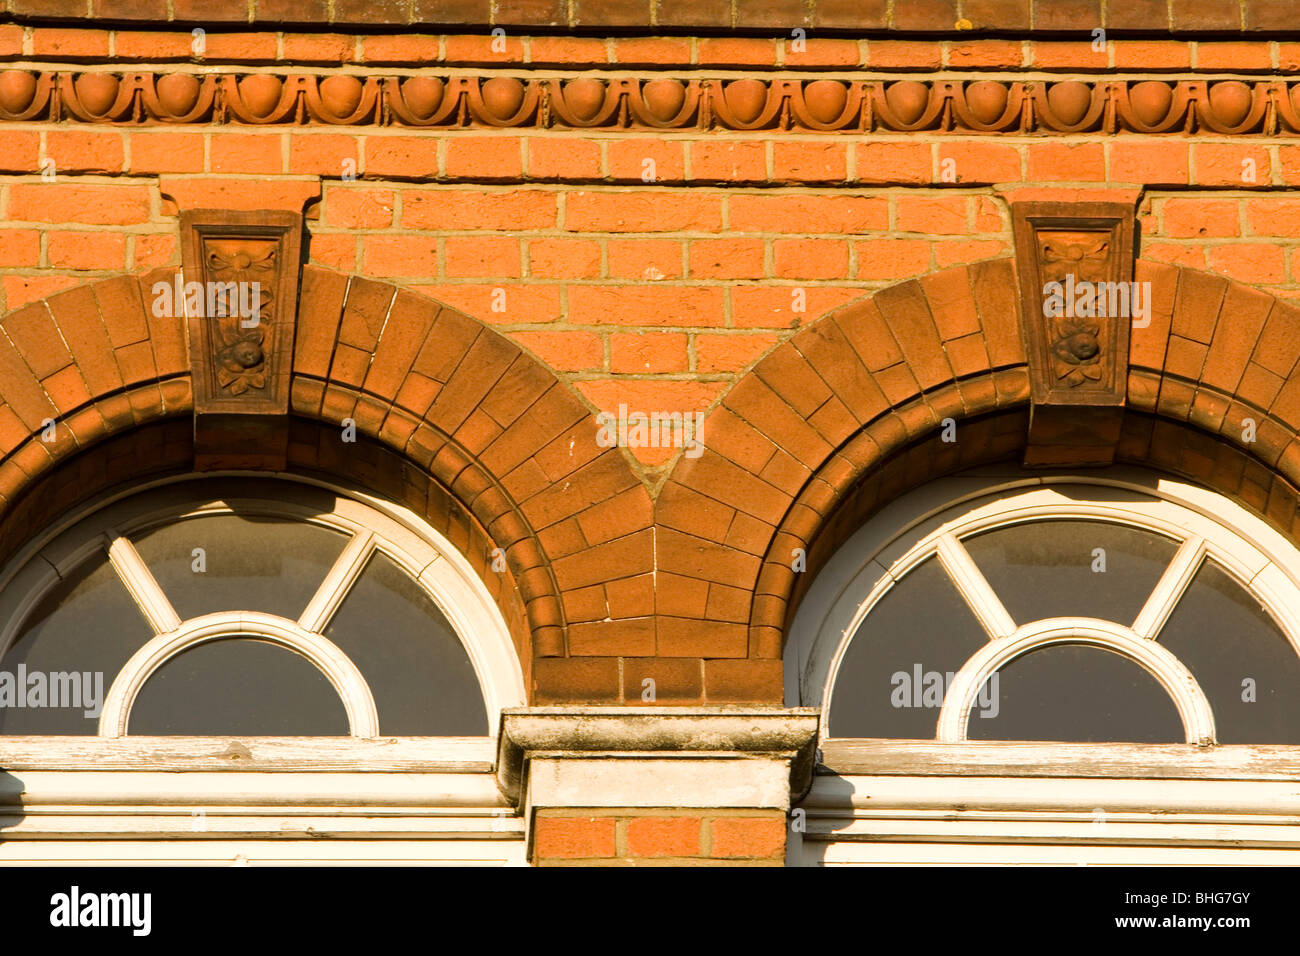 Architectural detail arched windows brick Stock Photo